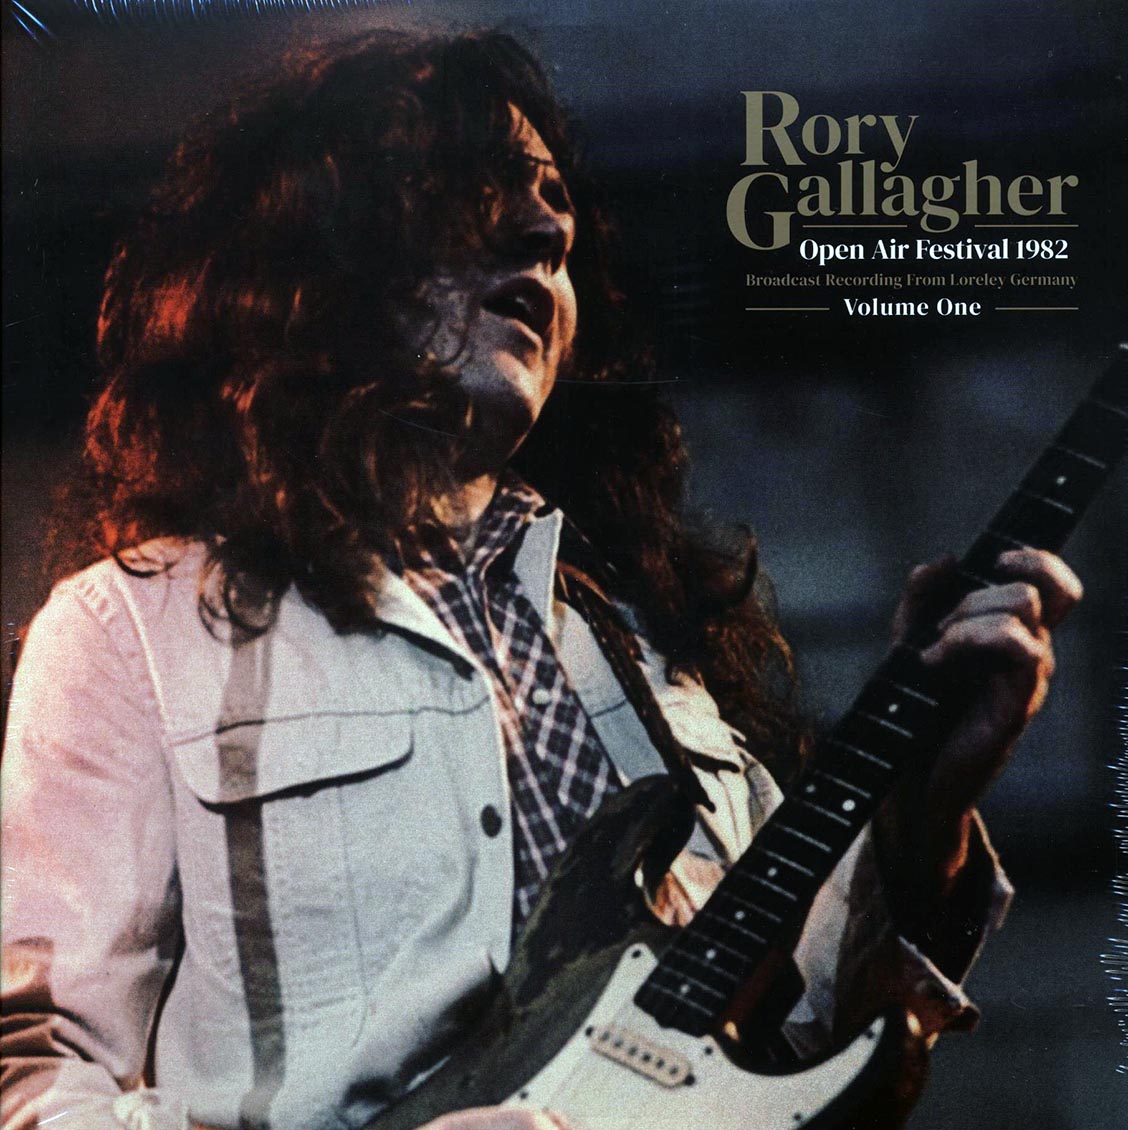 Rory Gallagher - Open Air Festival 1982 Volume 1: Broadcast Recording From Loreley Germany (2xLP) - Vinyl LP